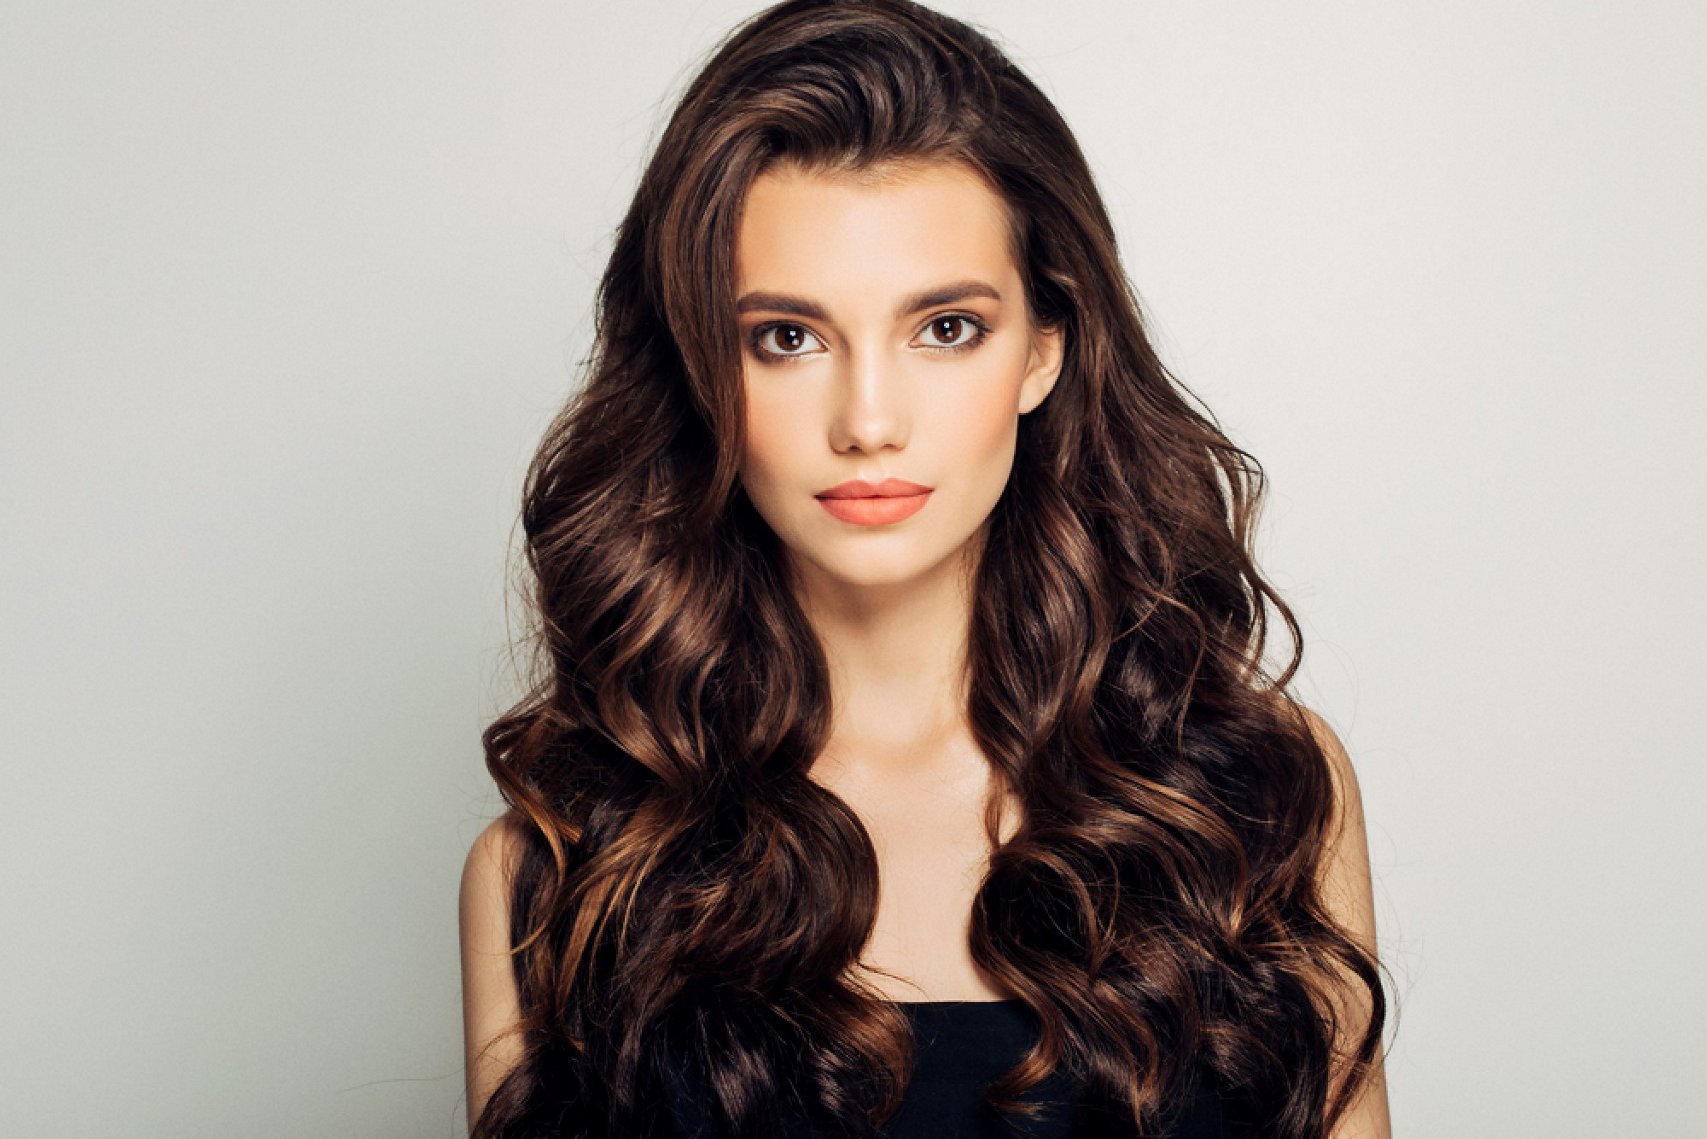 Brunette woman with a bouncy blow-dry